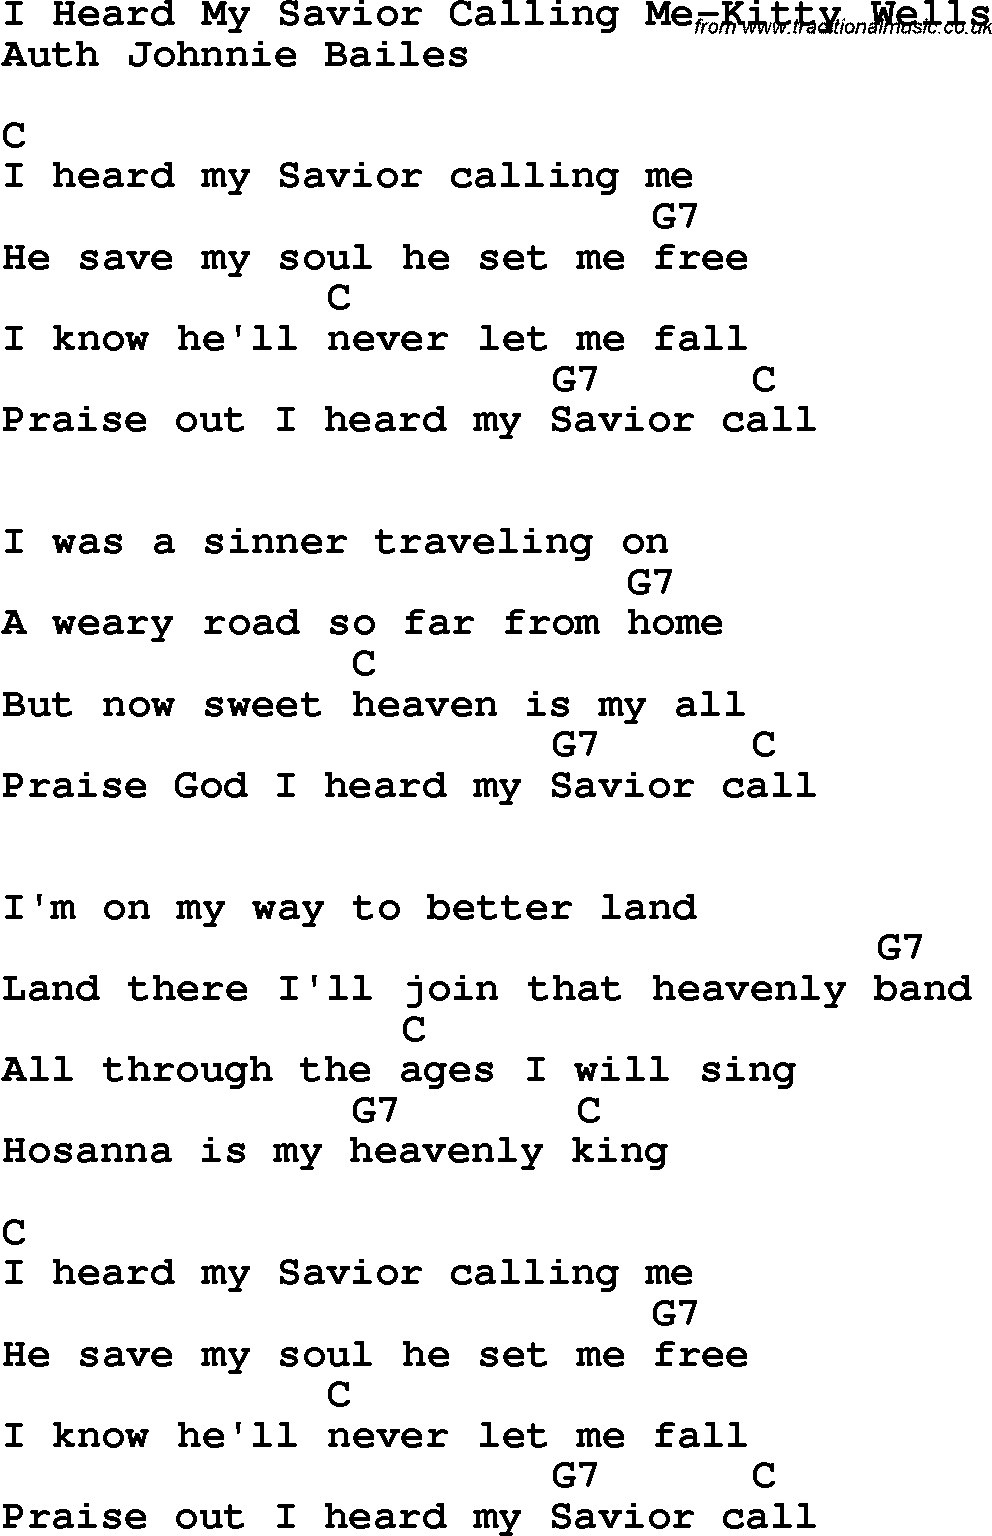 Country, Southern and Bluegrass Gospel Song I Heard My Savior Calling Me-Kitty Wells lyrics and chords